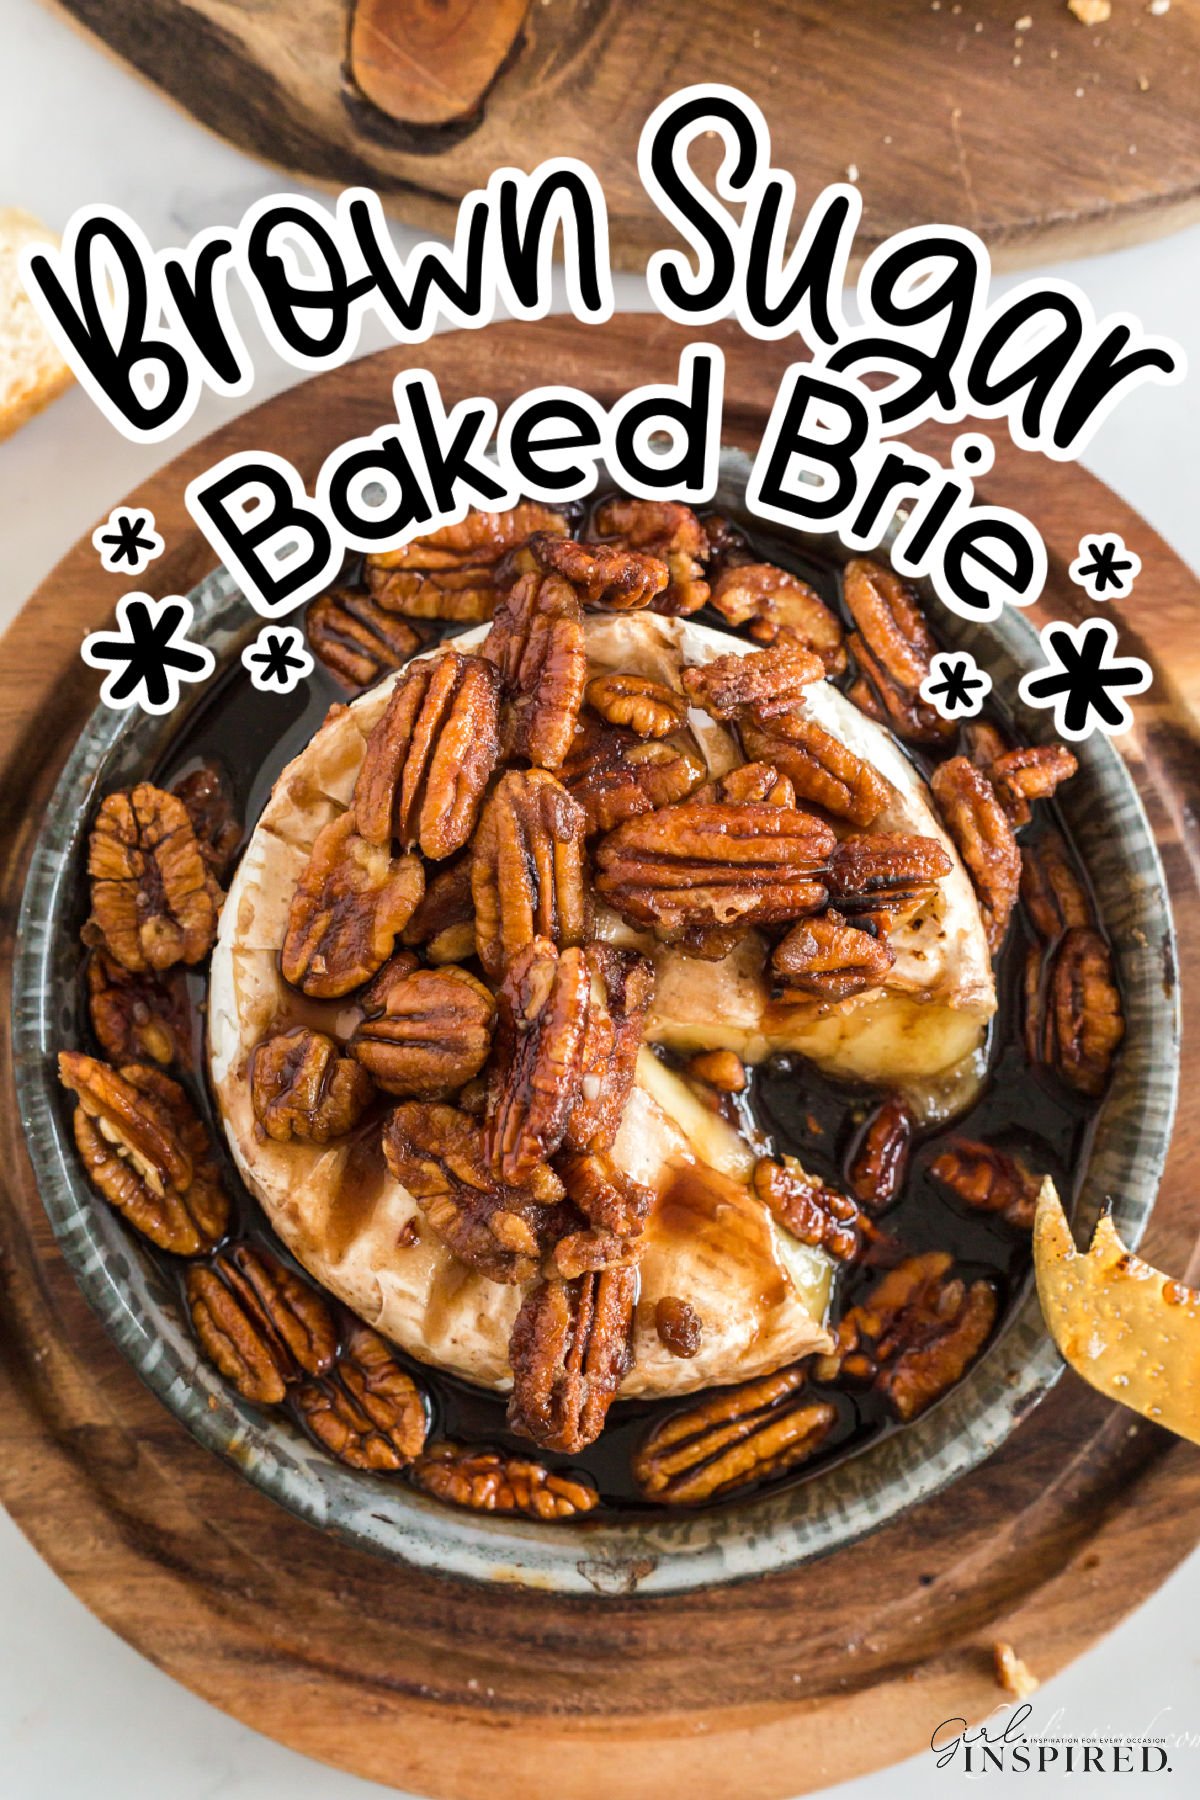 Brown sugar baked brie with pecans with a scoop missing from the wheel.